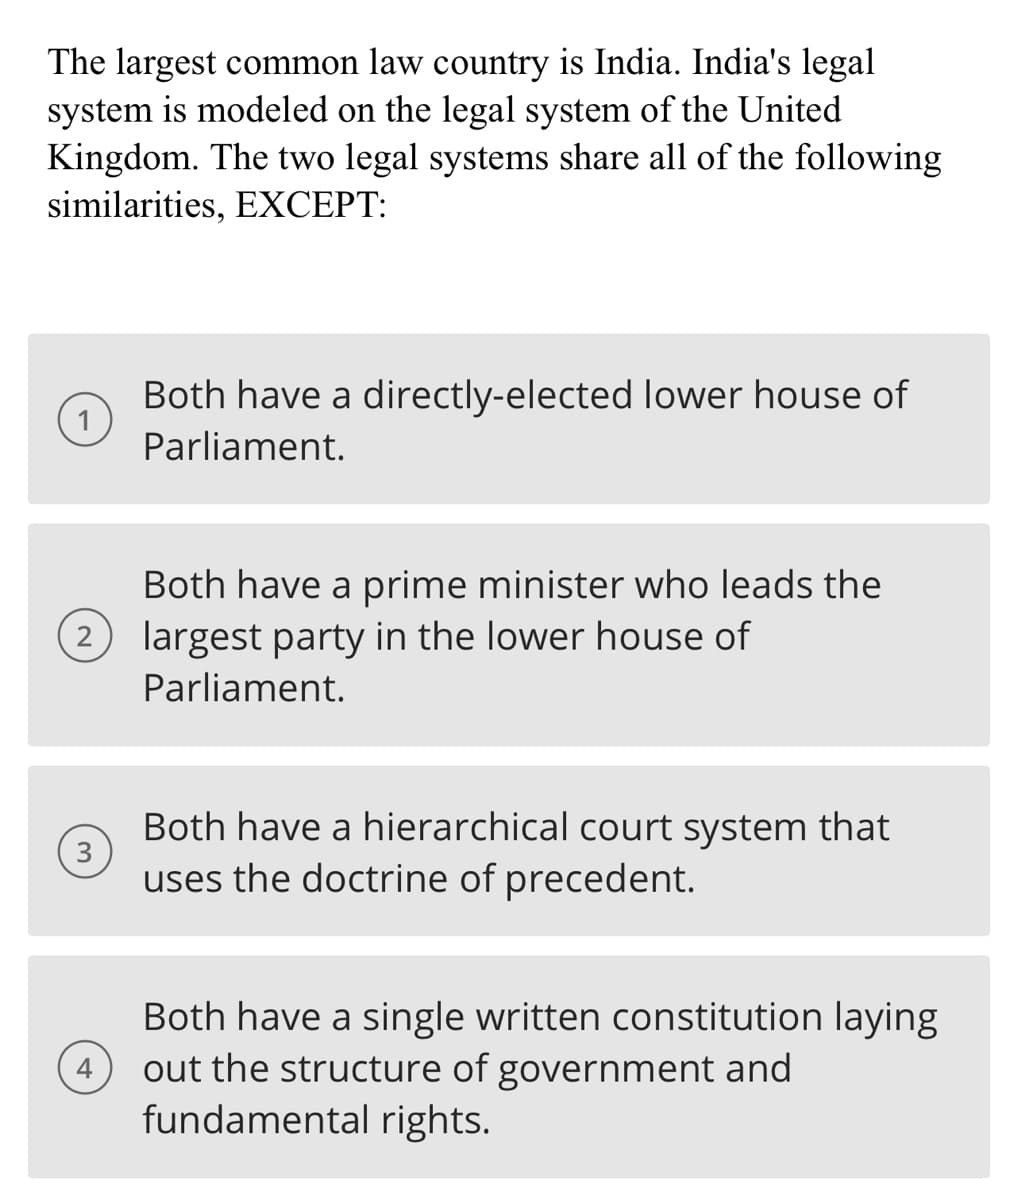 The largest common law country is India. India's legal
system is modeled on the legal system of the United
Kingdom. The two legal systems share all of the following
similarities, EXCEPT:
1
2
3
4
Both have a directly-elected lower house of
Parliament.
Both have a prime minister who leads the
largest party in the lower house of
Parliament.
Both have a hierarchical court system that
uses the doctrine of precedent.
Both have a single written constitution laying
out the structure of government and
fundamental rights.